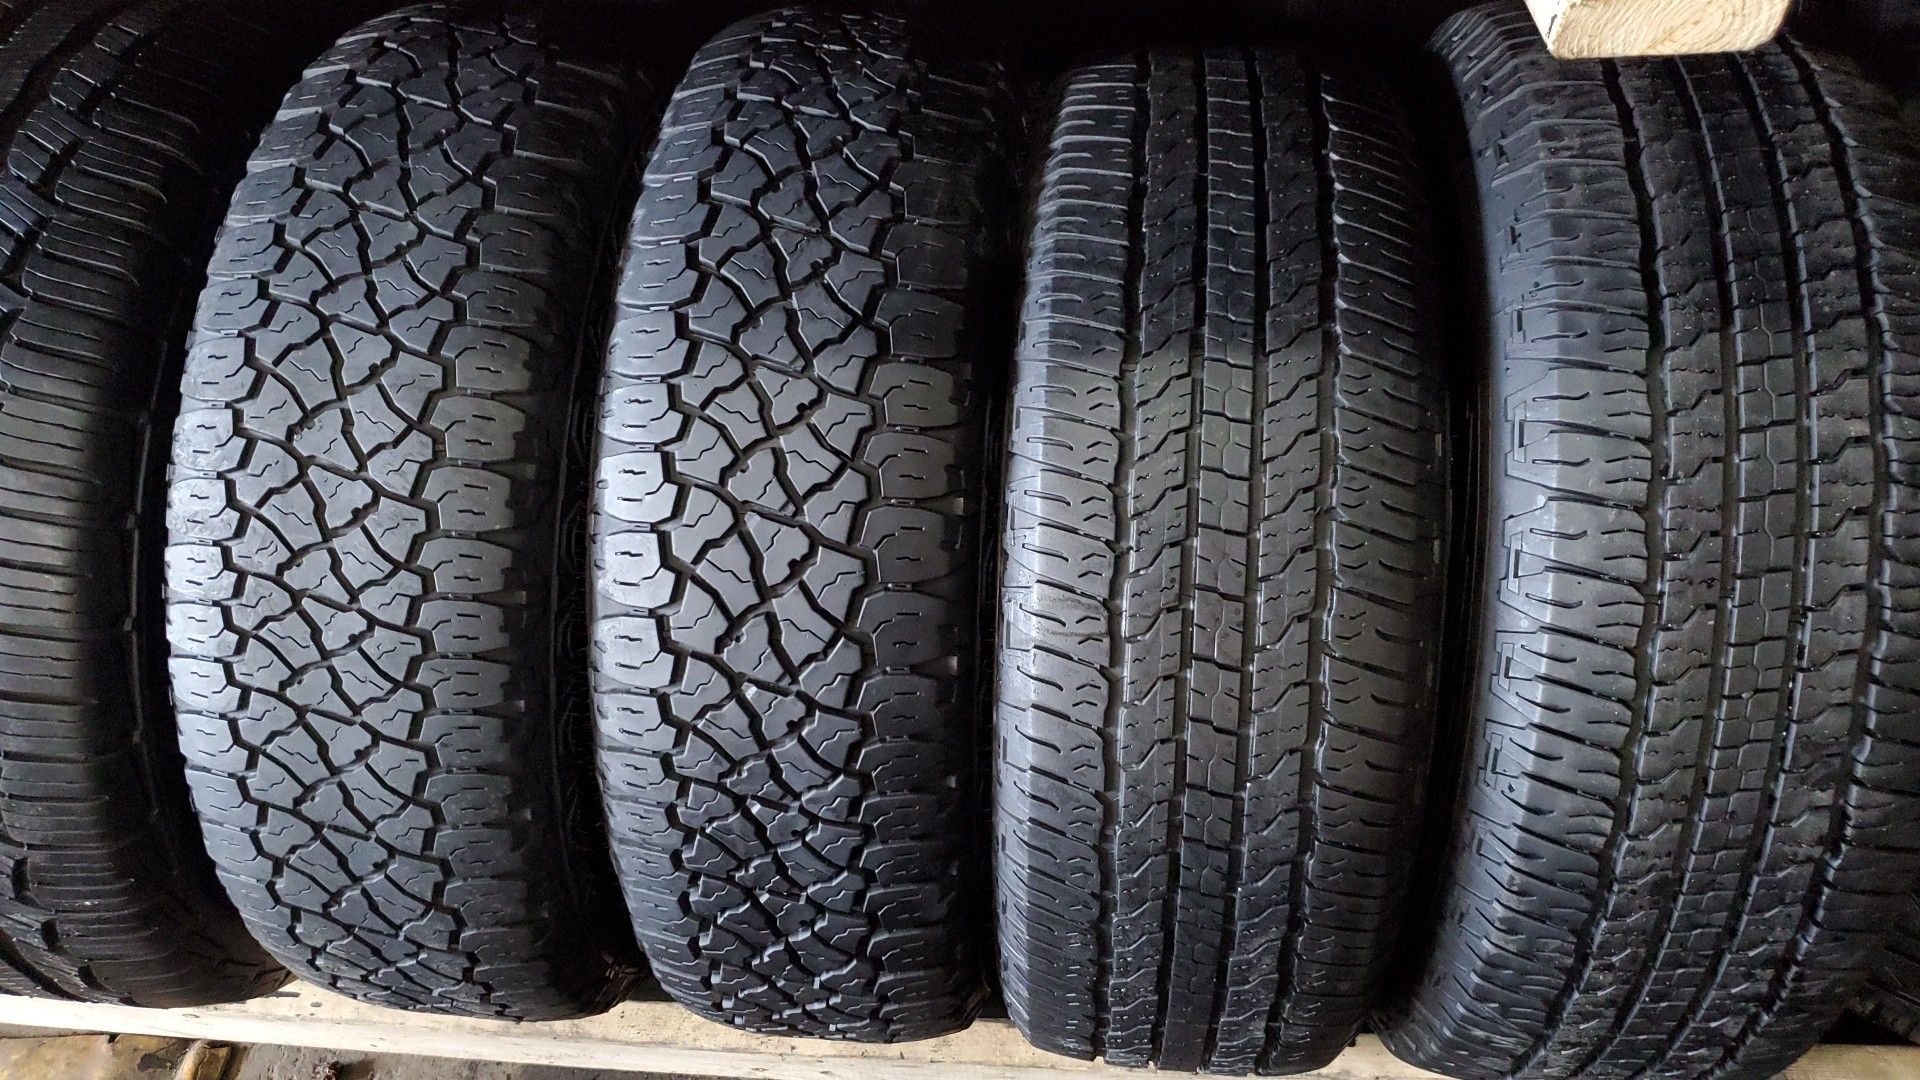 Four good set of slightly use tires for sale 265/70/17